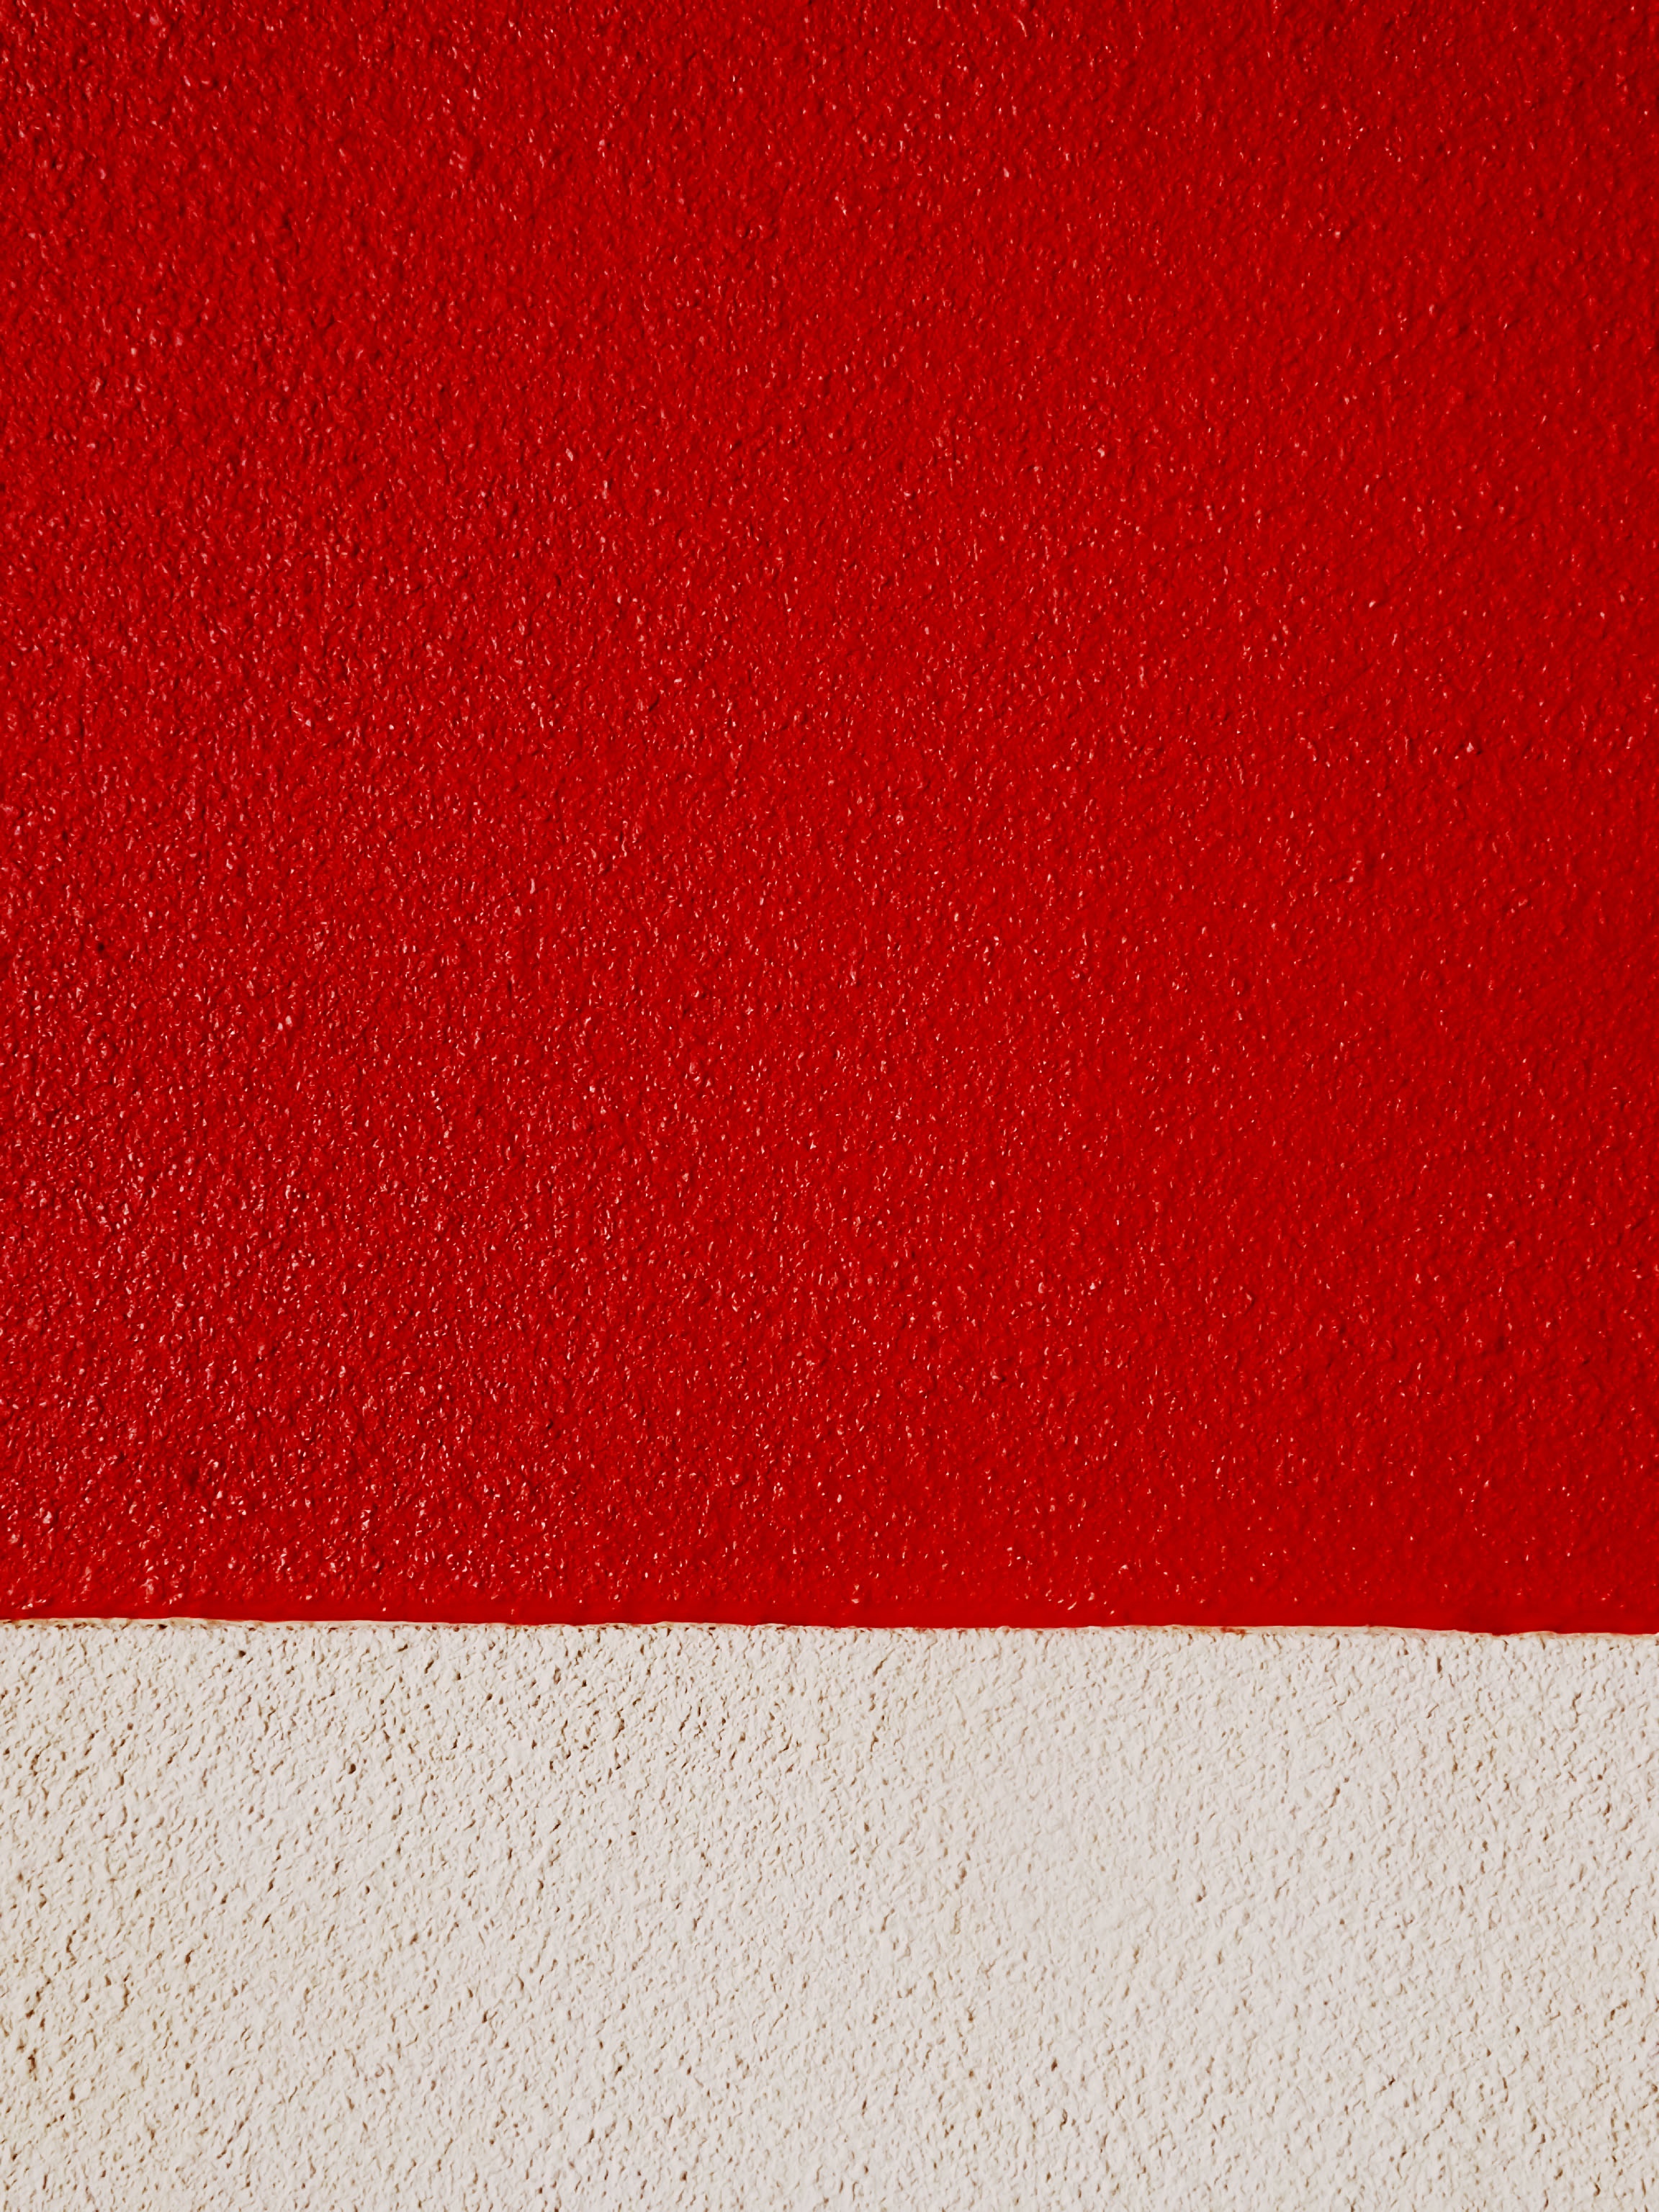 texture, paint, red, textures, wall, rough